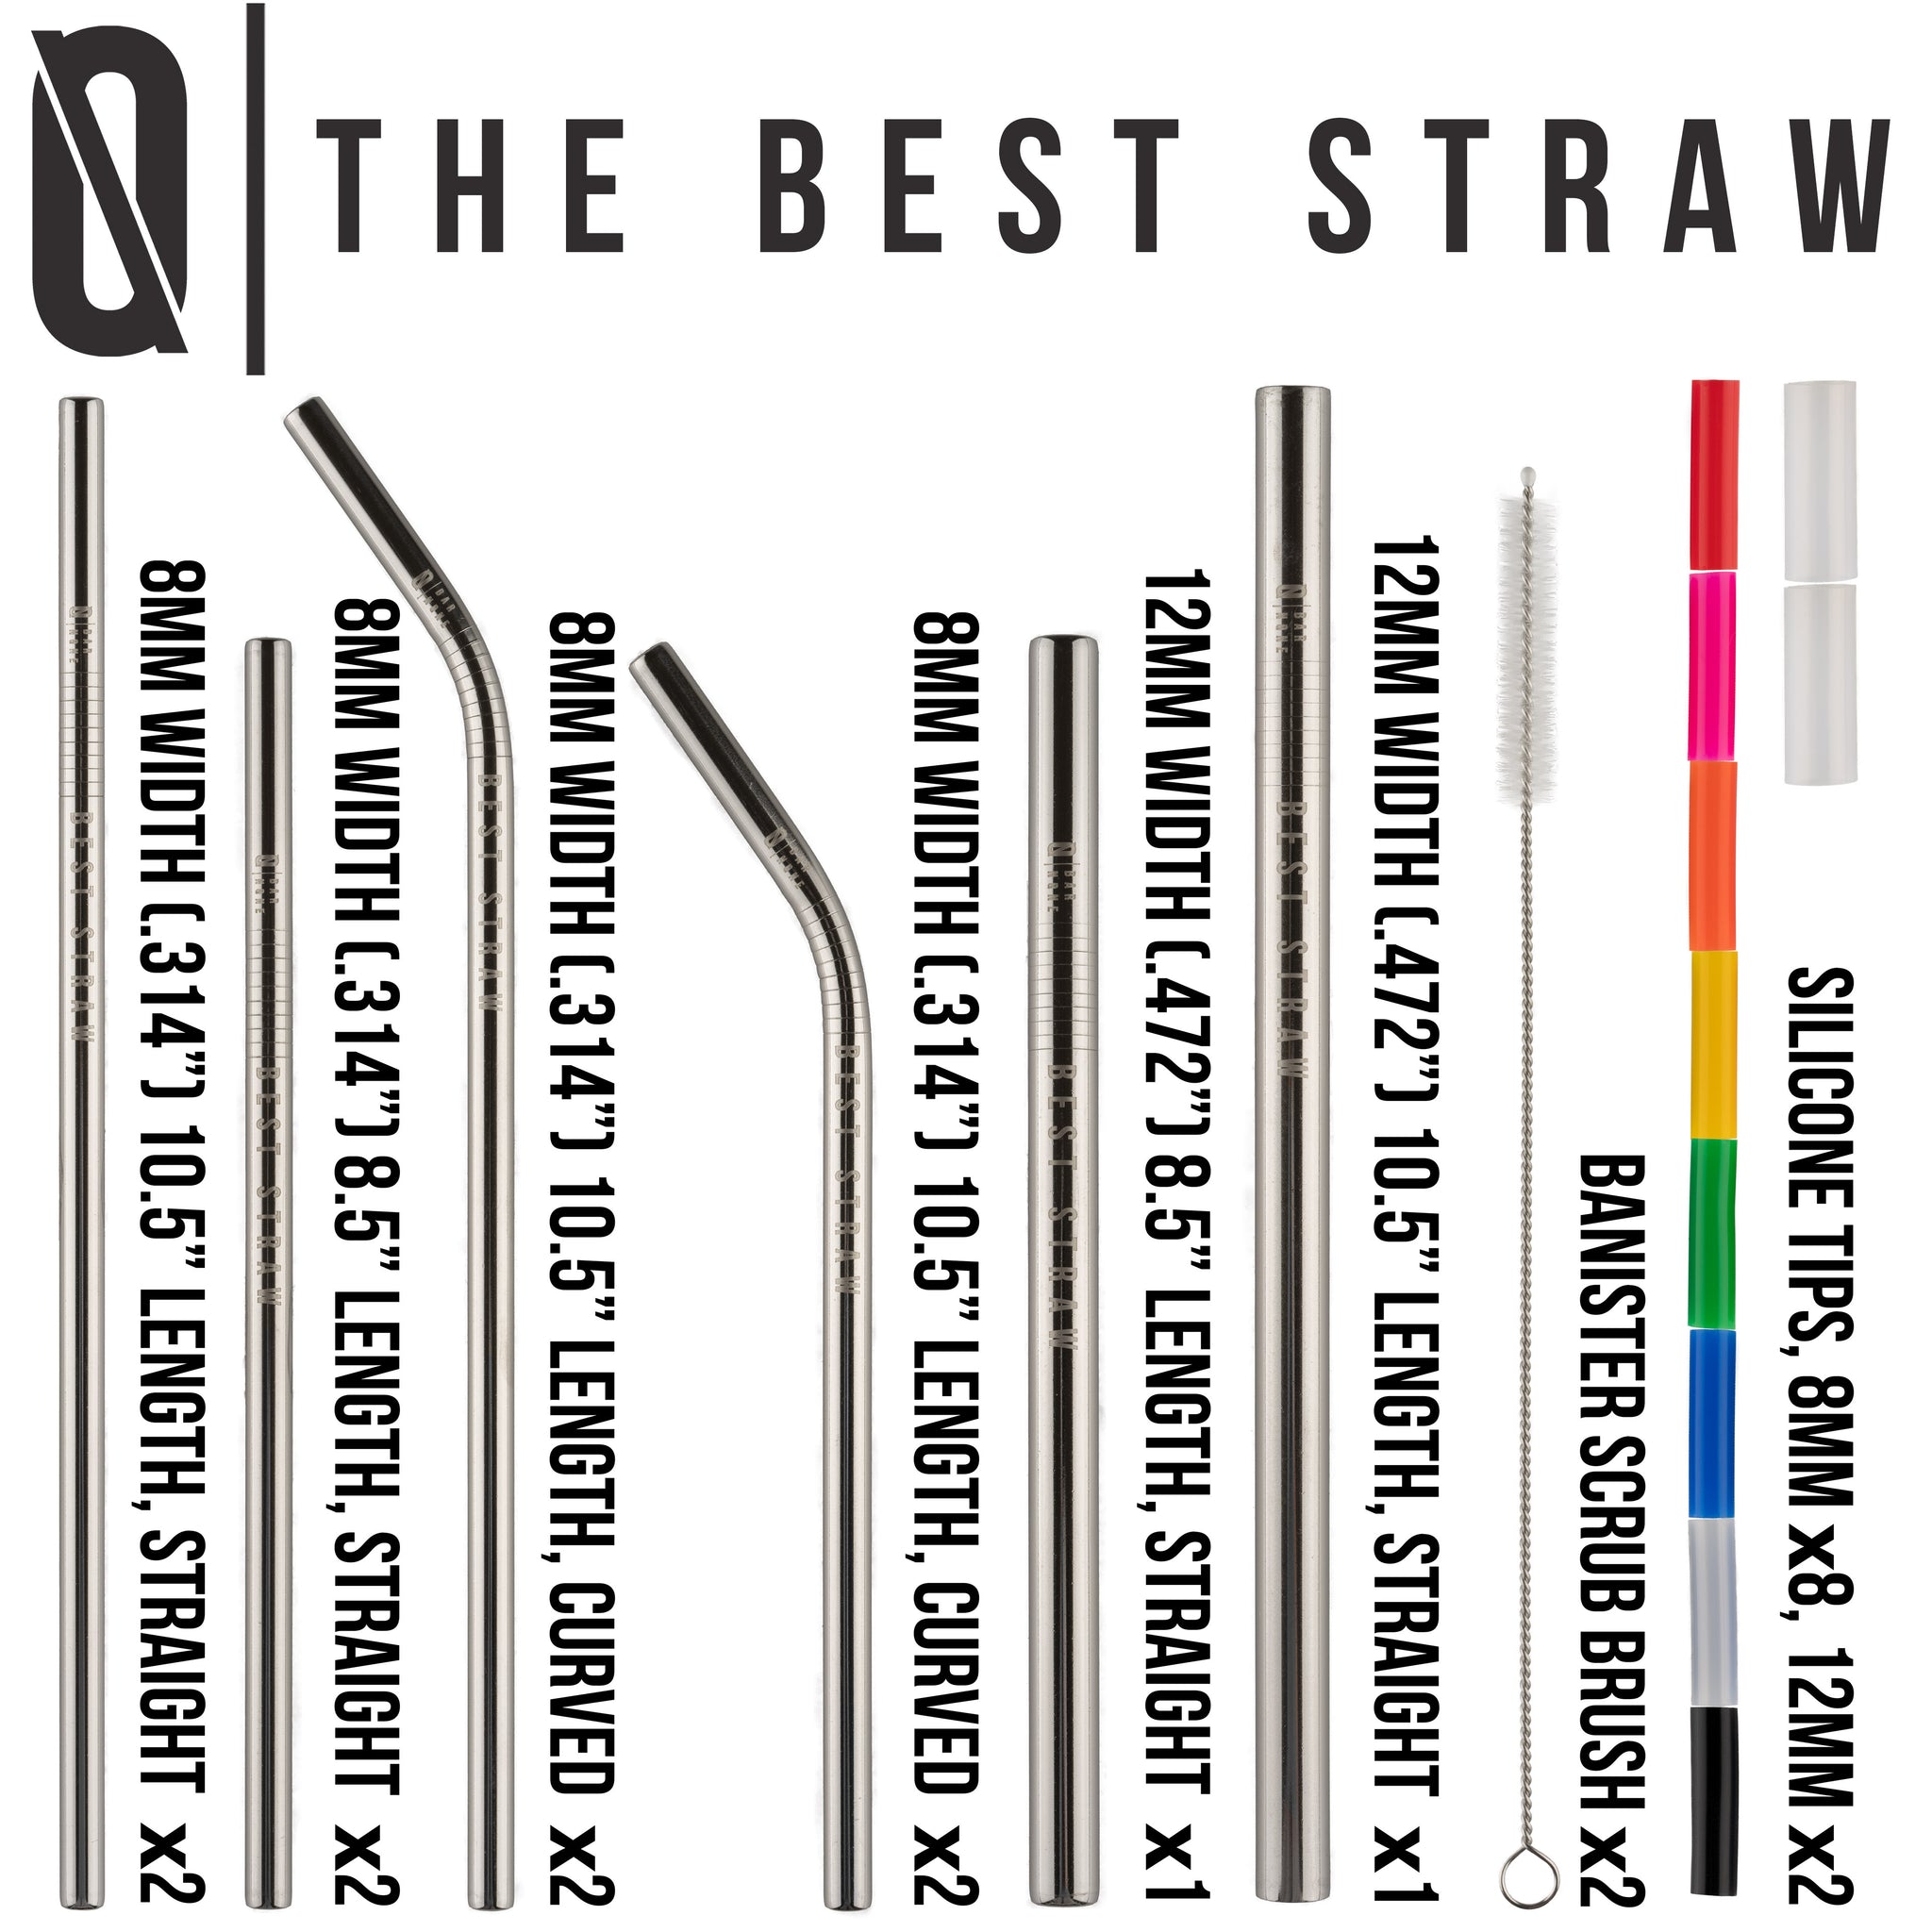 Good Cook Touch Stainless Steel Straws, 10 x 4.3 x 0.75, Assorted